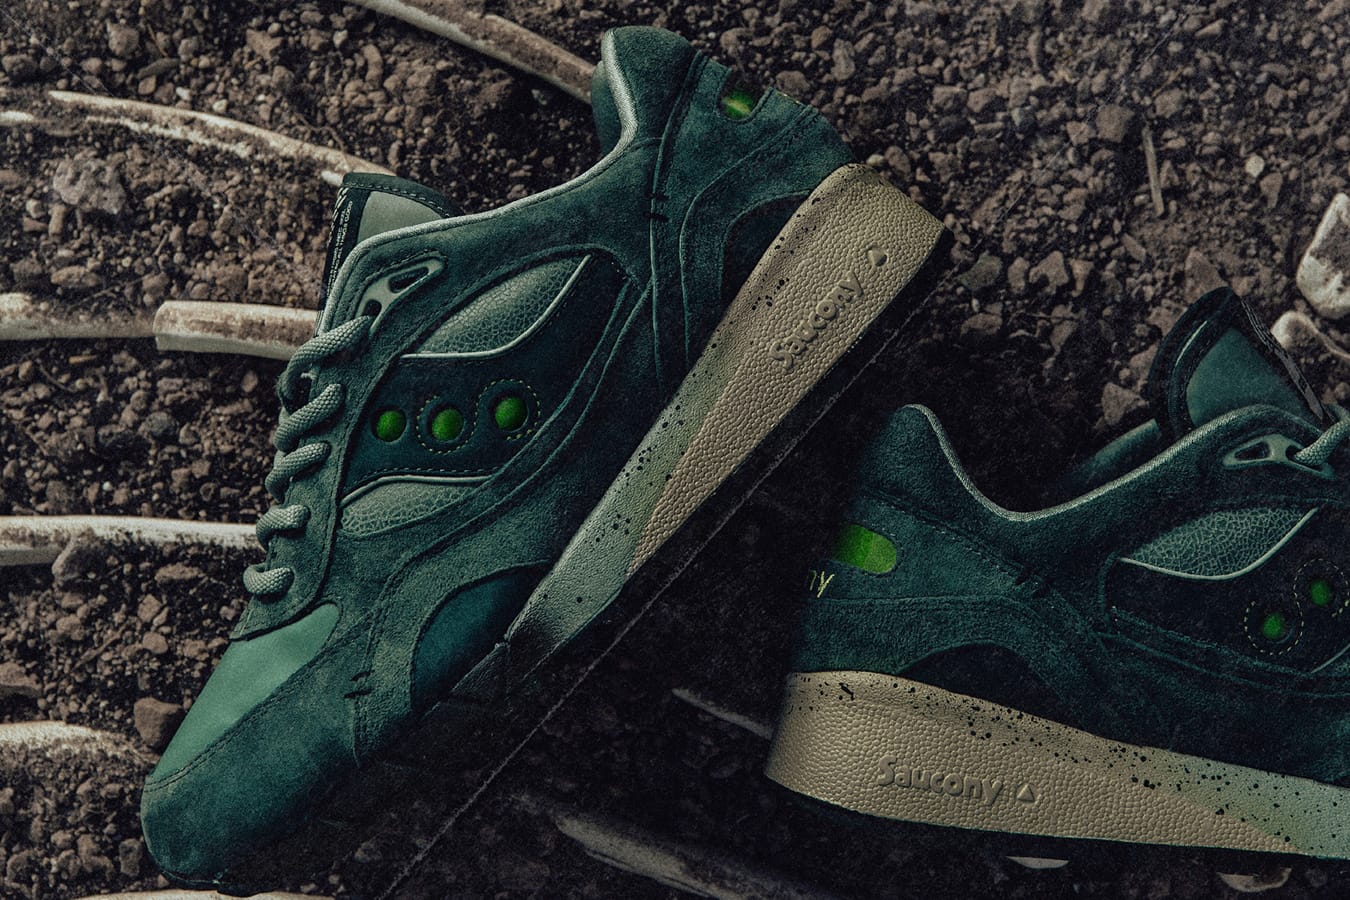 feature x saucony shadow 6000